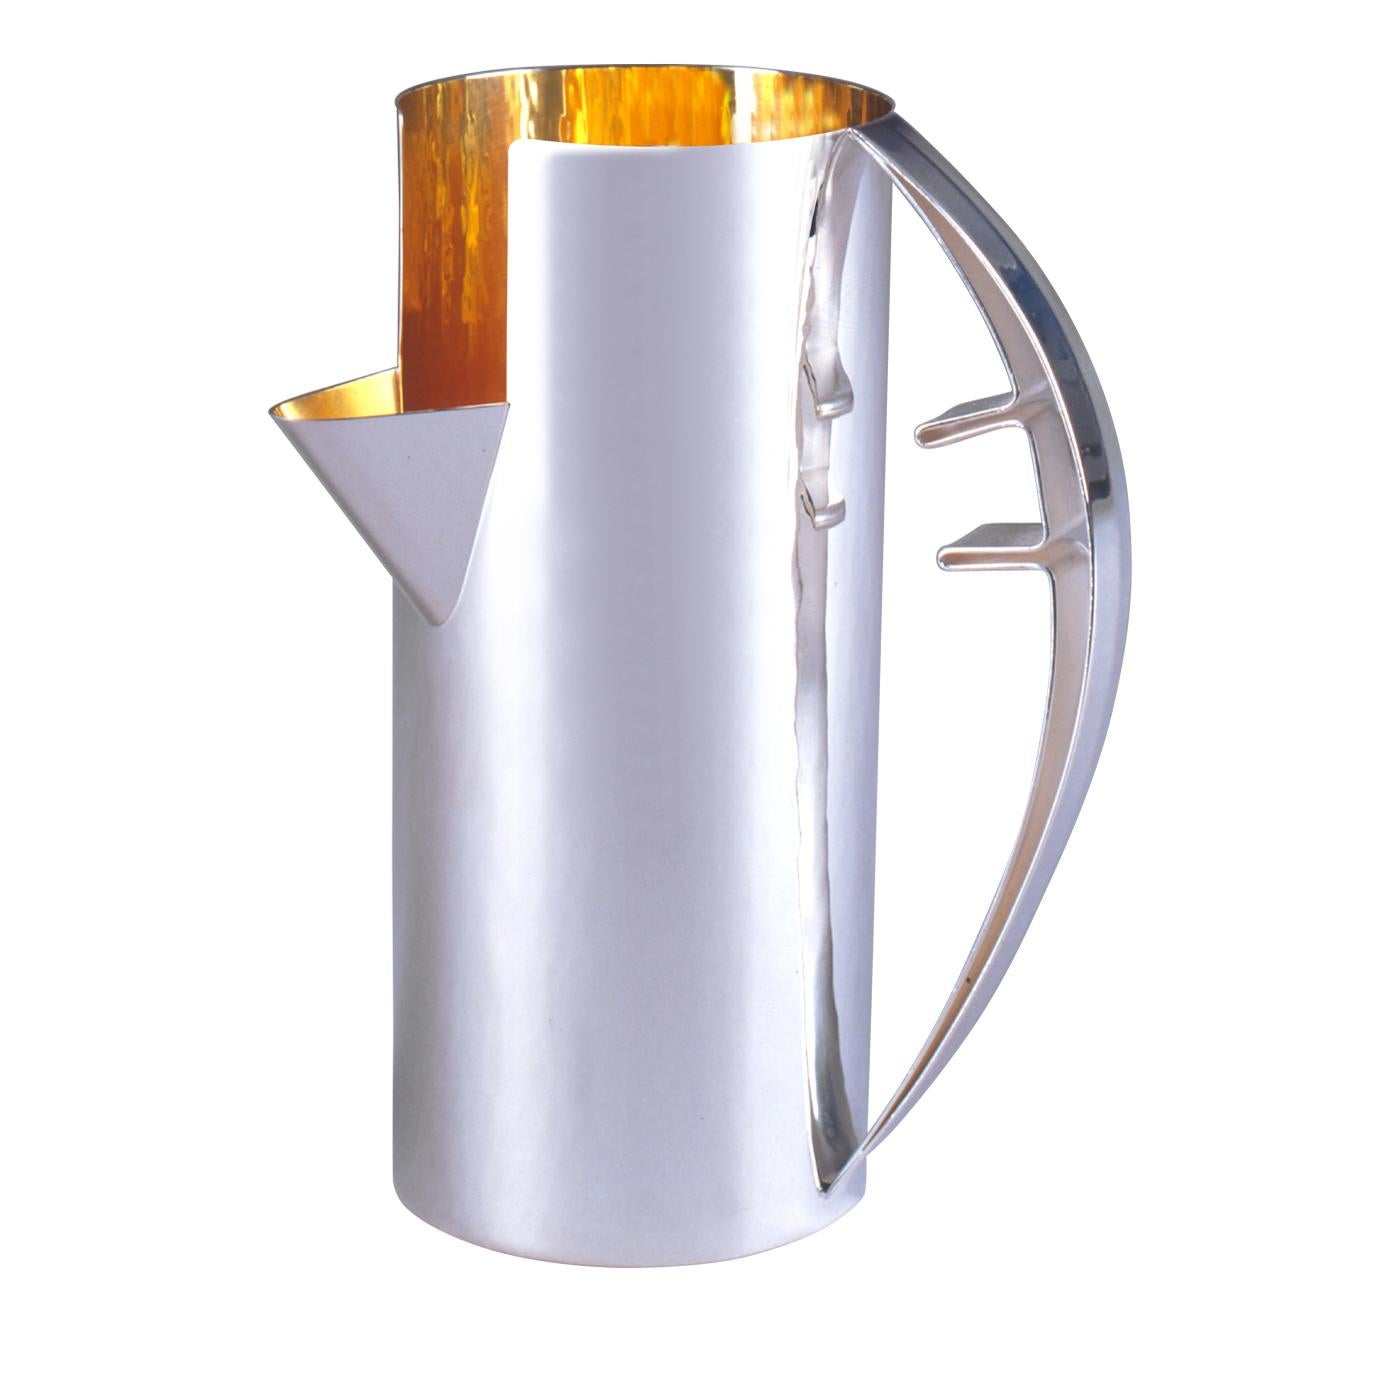 This pitcher will make an exemplary addition to any tableware collection. It is crafted entirely in pure 925 silver, which has been plated in gold on its interior. It features a large curved handle and a deep set spout, allowing for easy pouring.